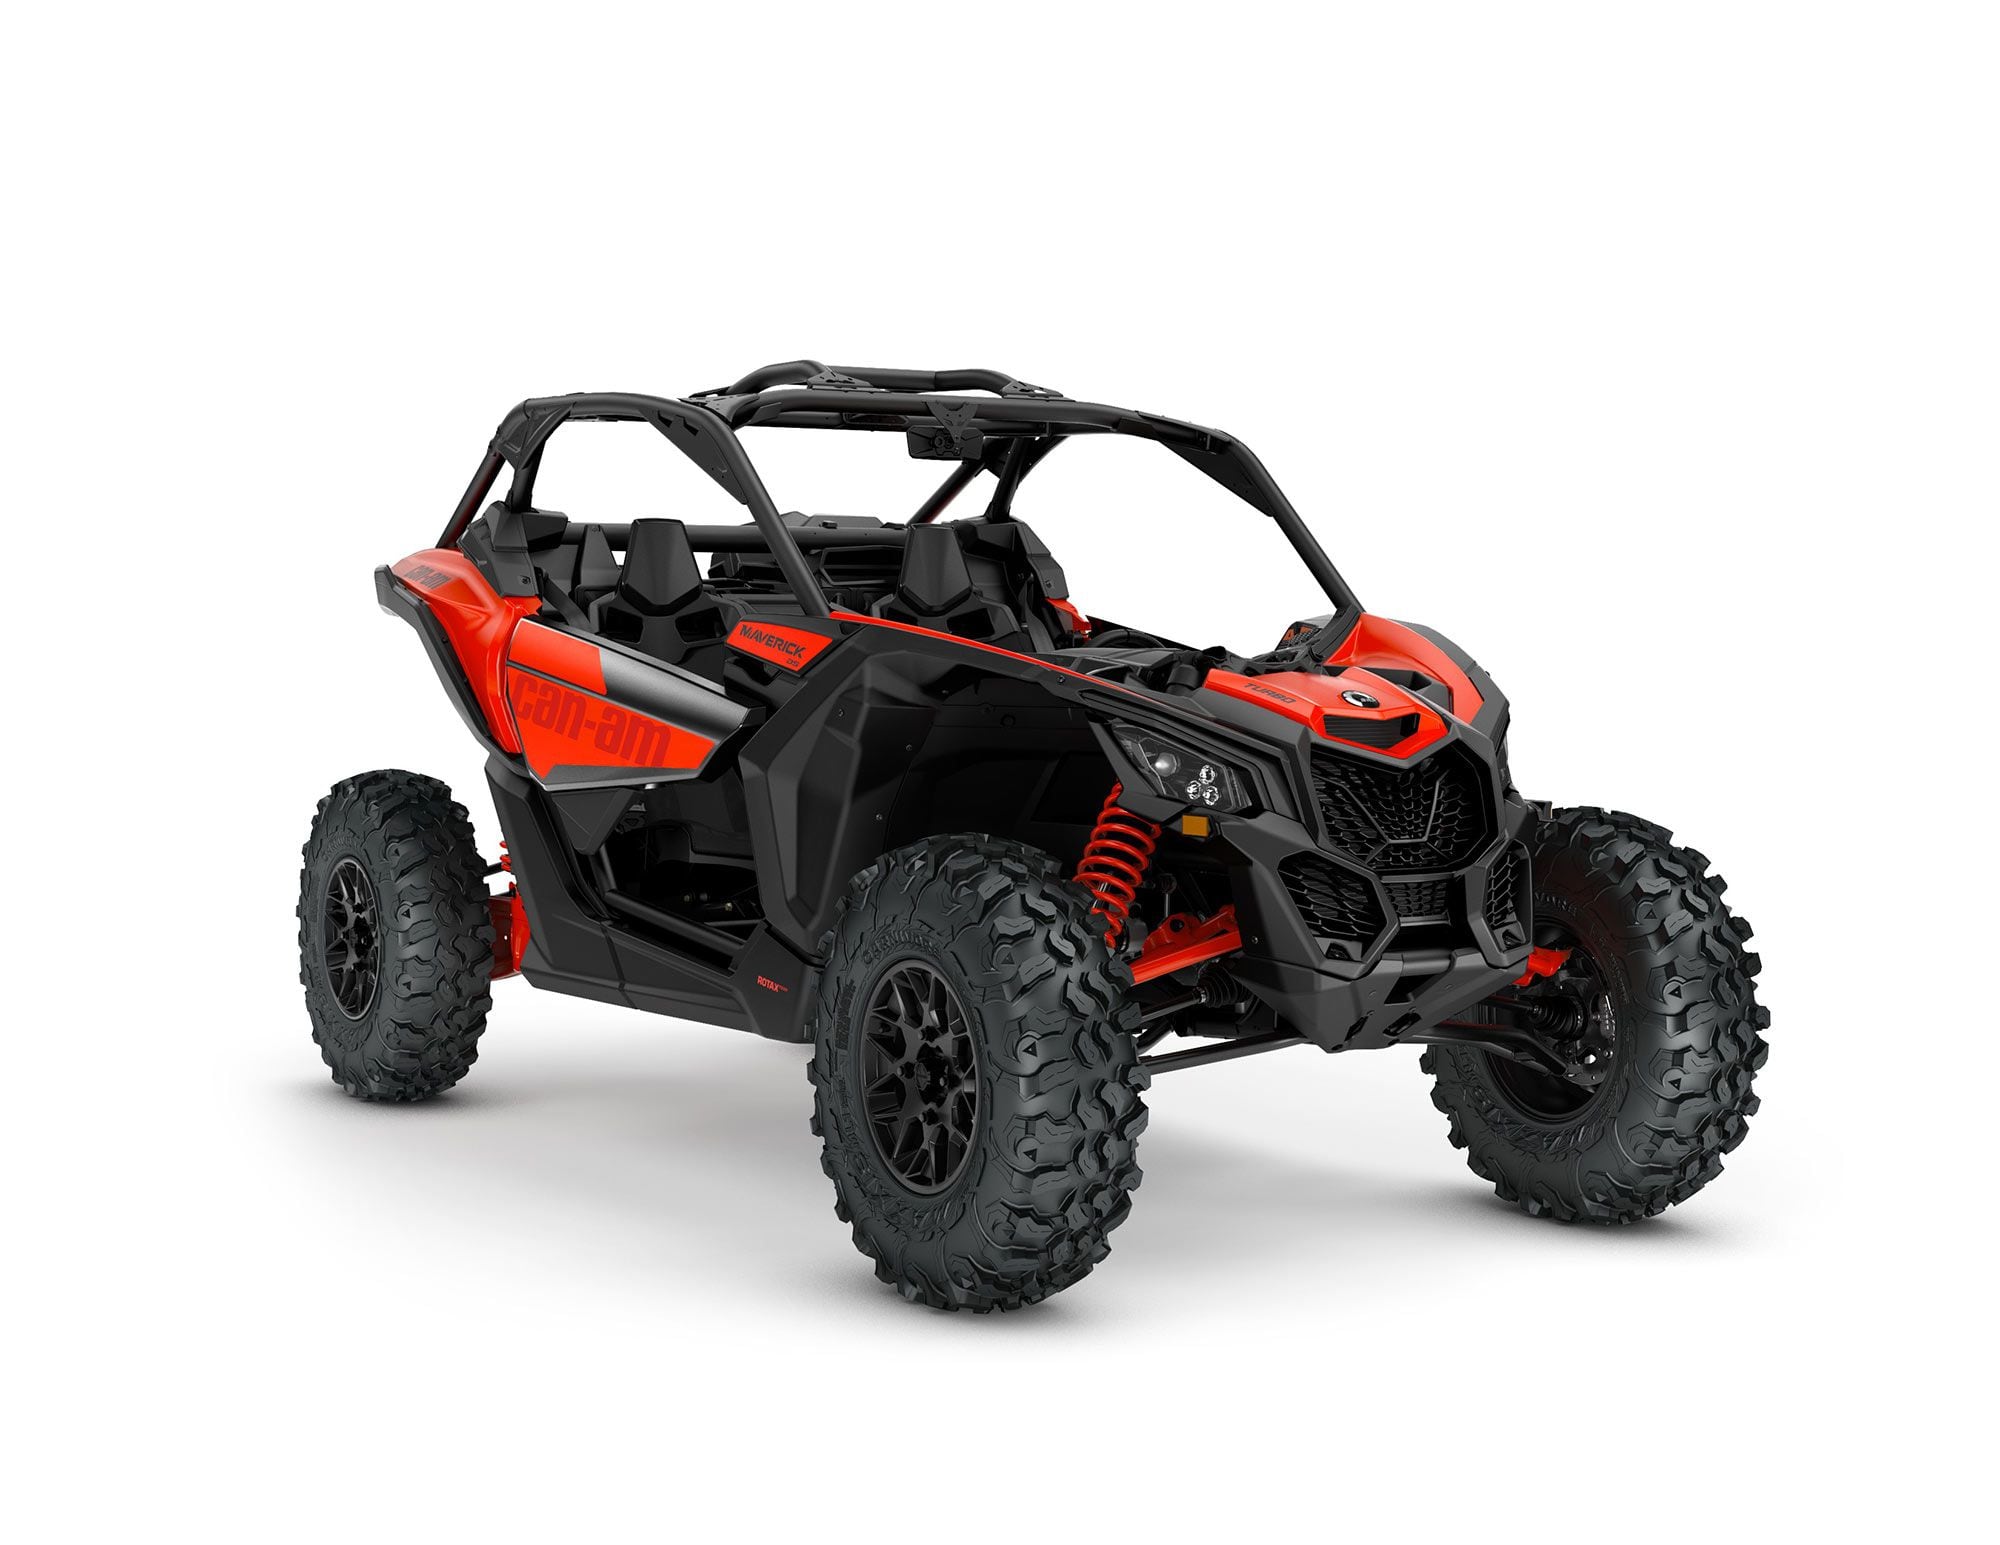 2022 Can-Am Maverick X3 DS Turbo front view in Can-Am Red color.